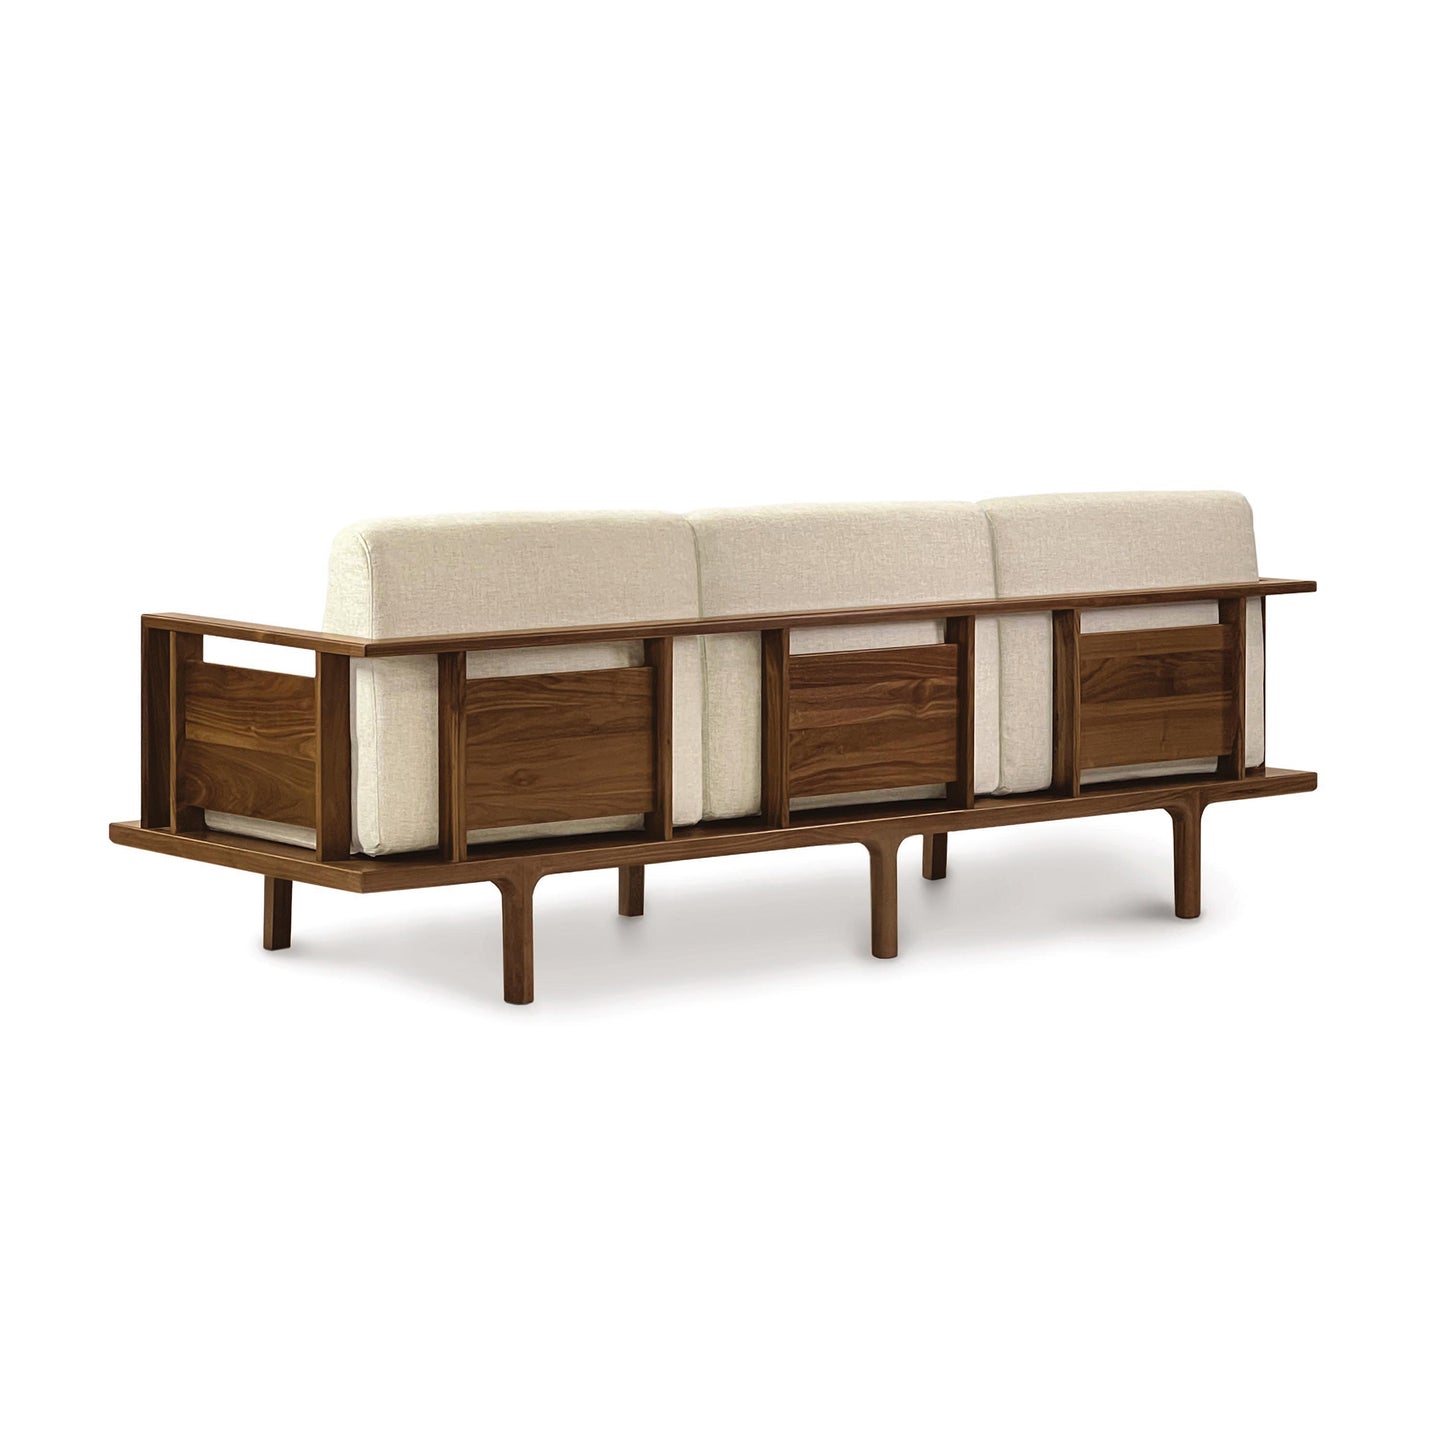 A modern wooden three-seater Copeland Furniture Sierra Walnut Upholstered Sofa with a white cushioned seat and back, featuring storage compartments on its sides.